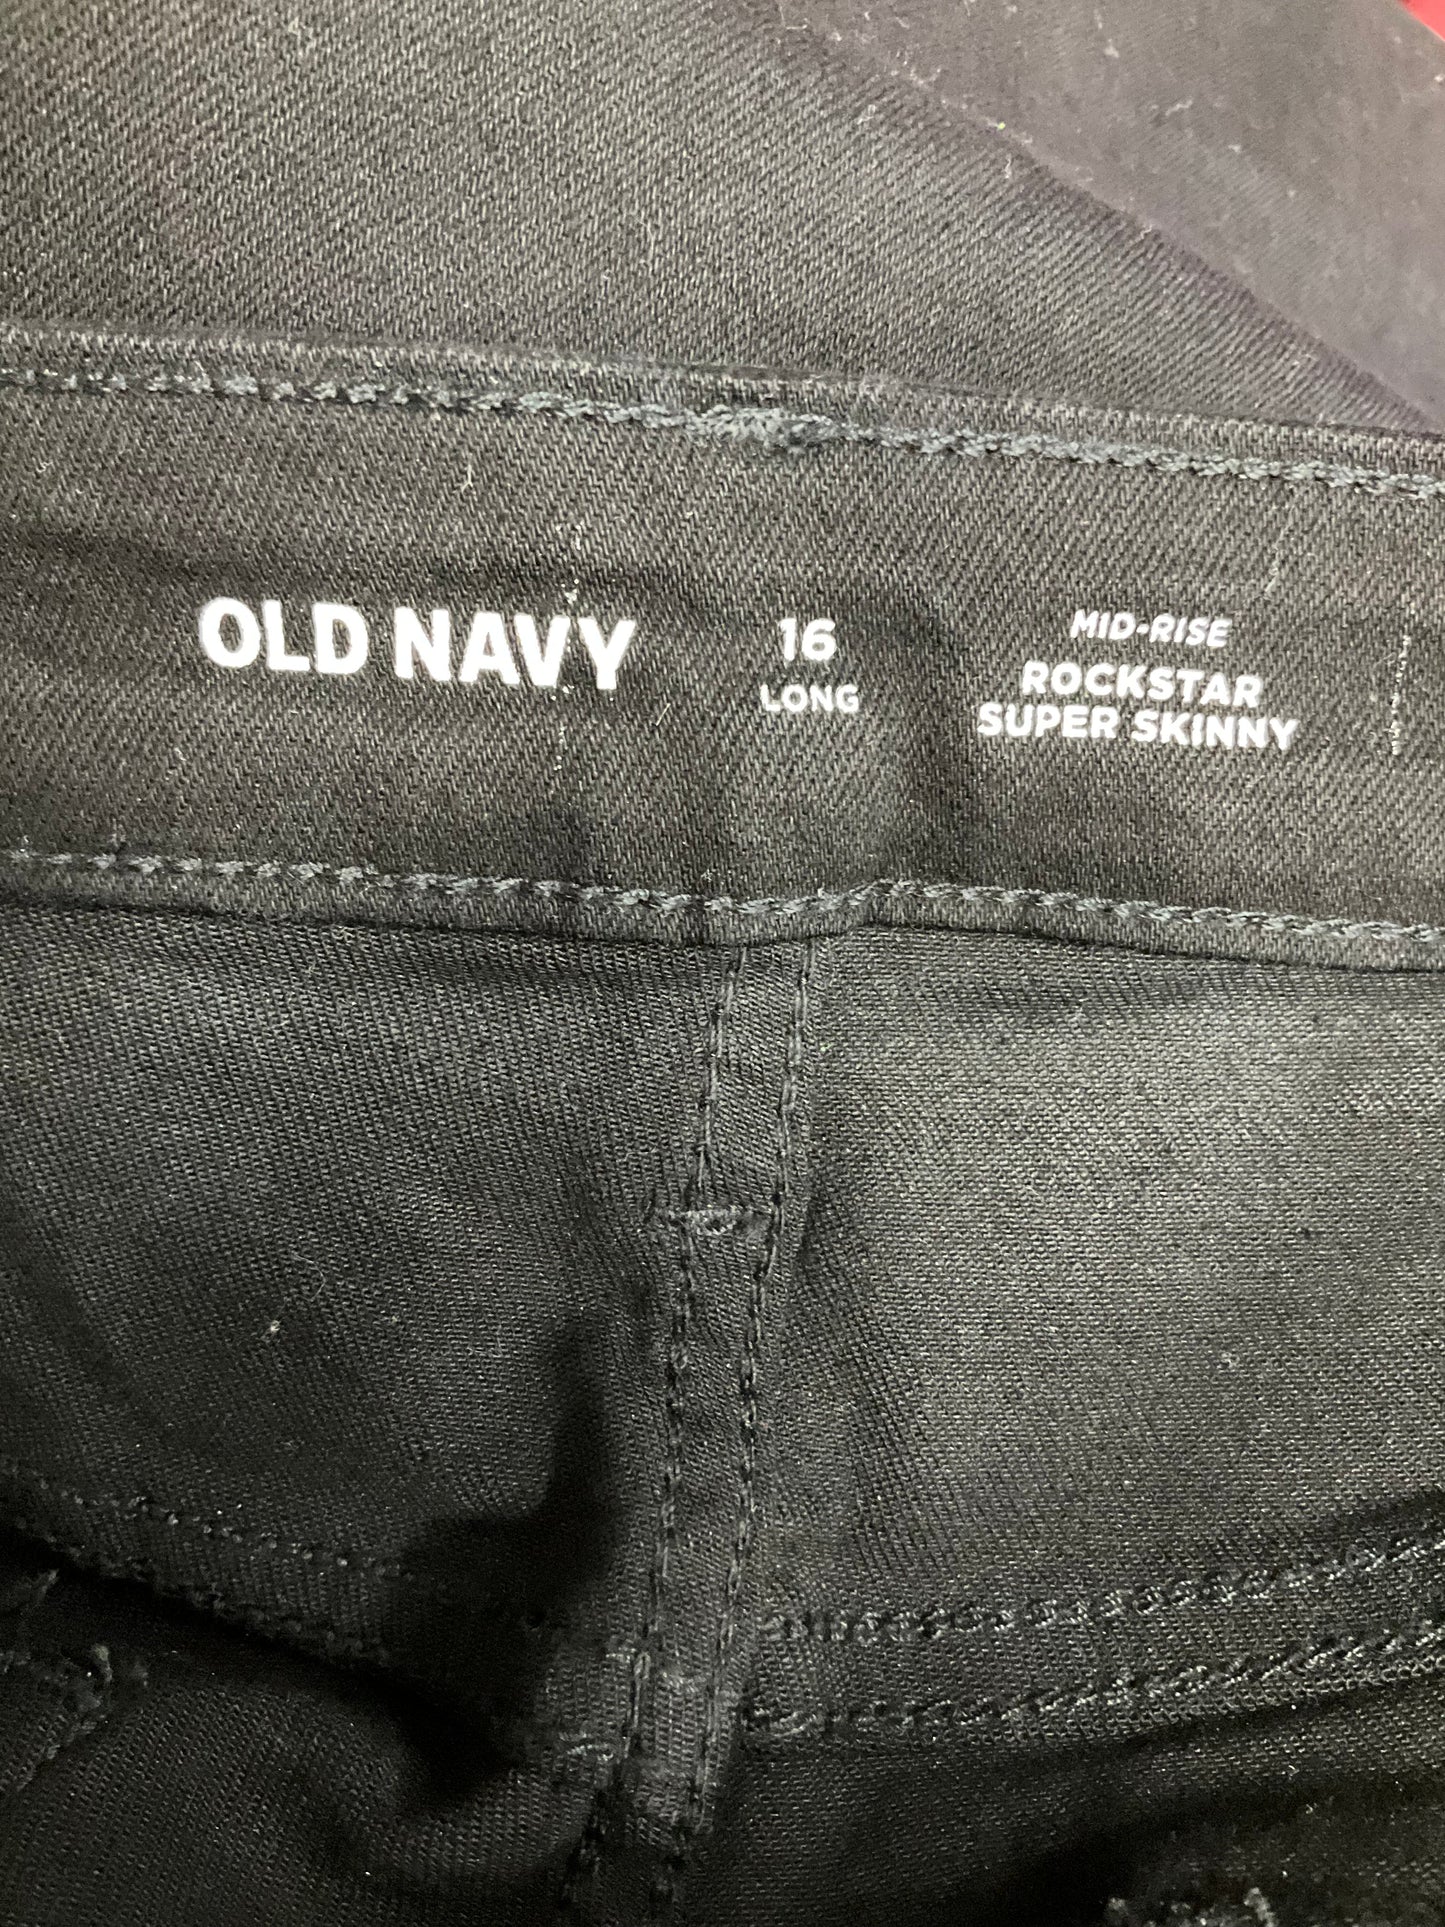 Black Jeans Straight Old Navy, Size 16